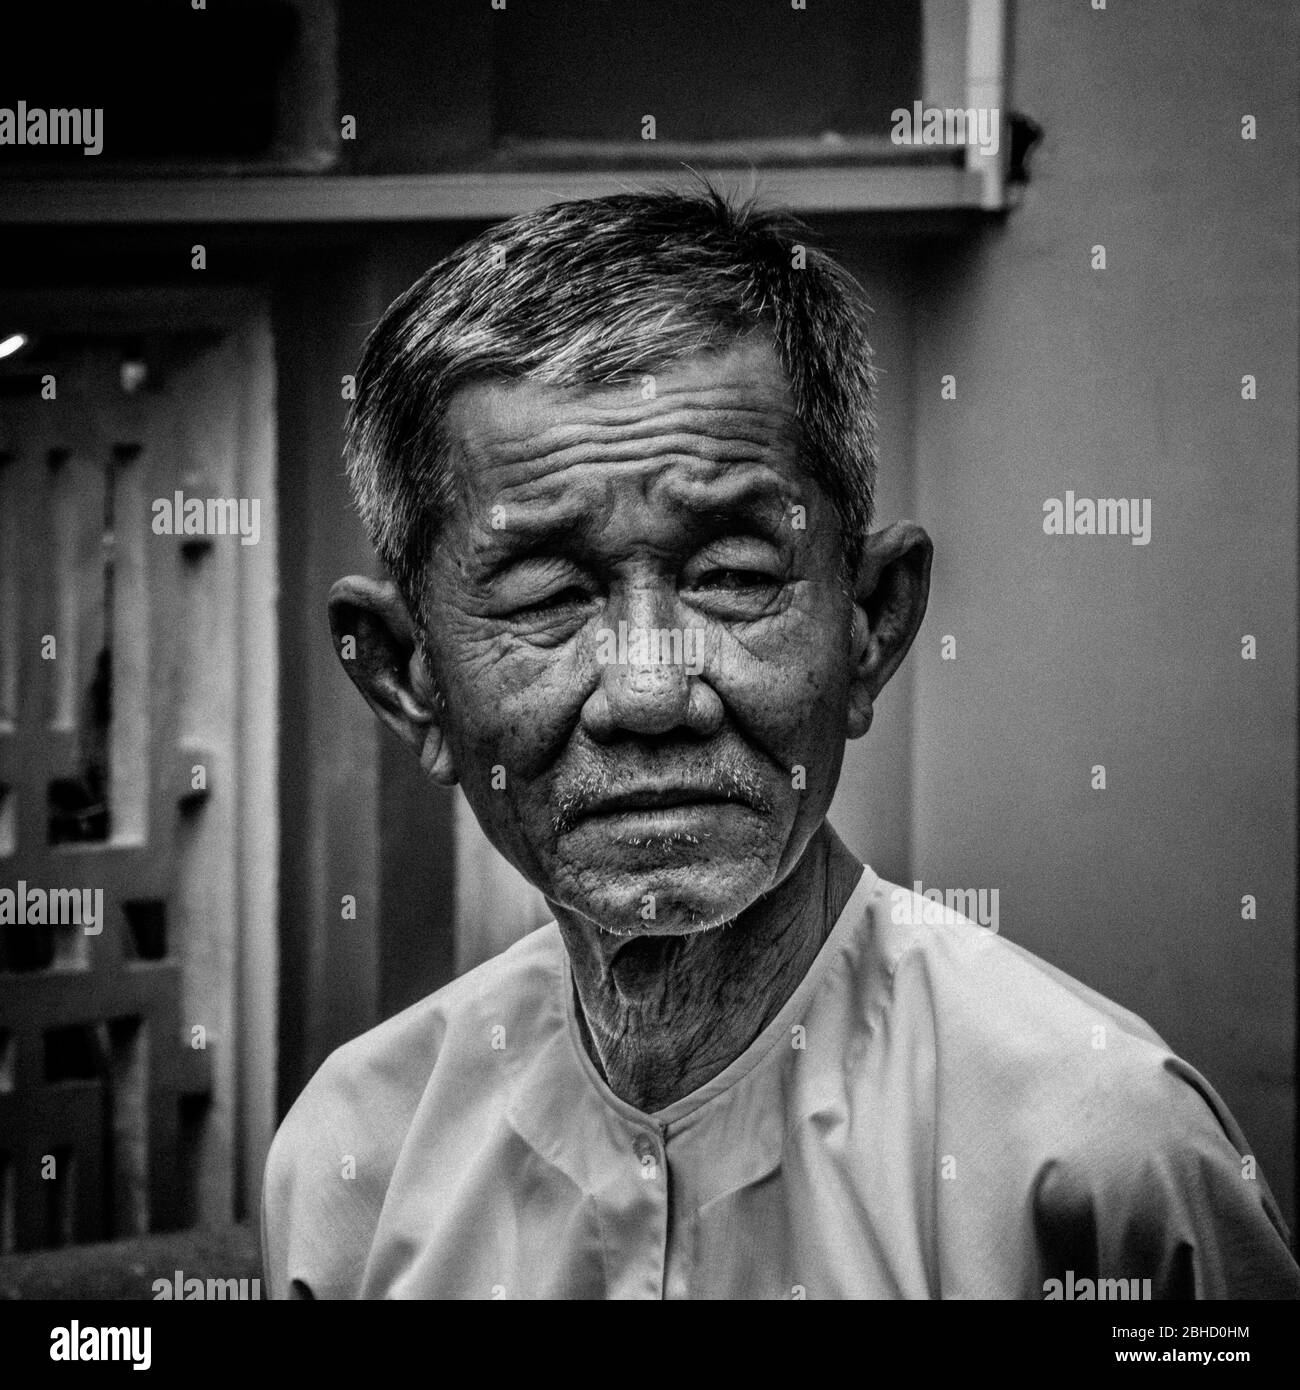 Black and white portrait of  unhappy wrinkled old Vietnamese man looking at camera, Sa Bec,Vietnam, Asia Stock Photo